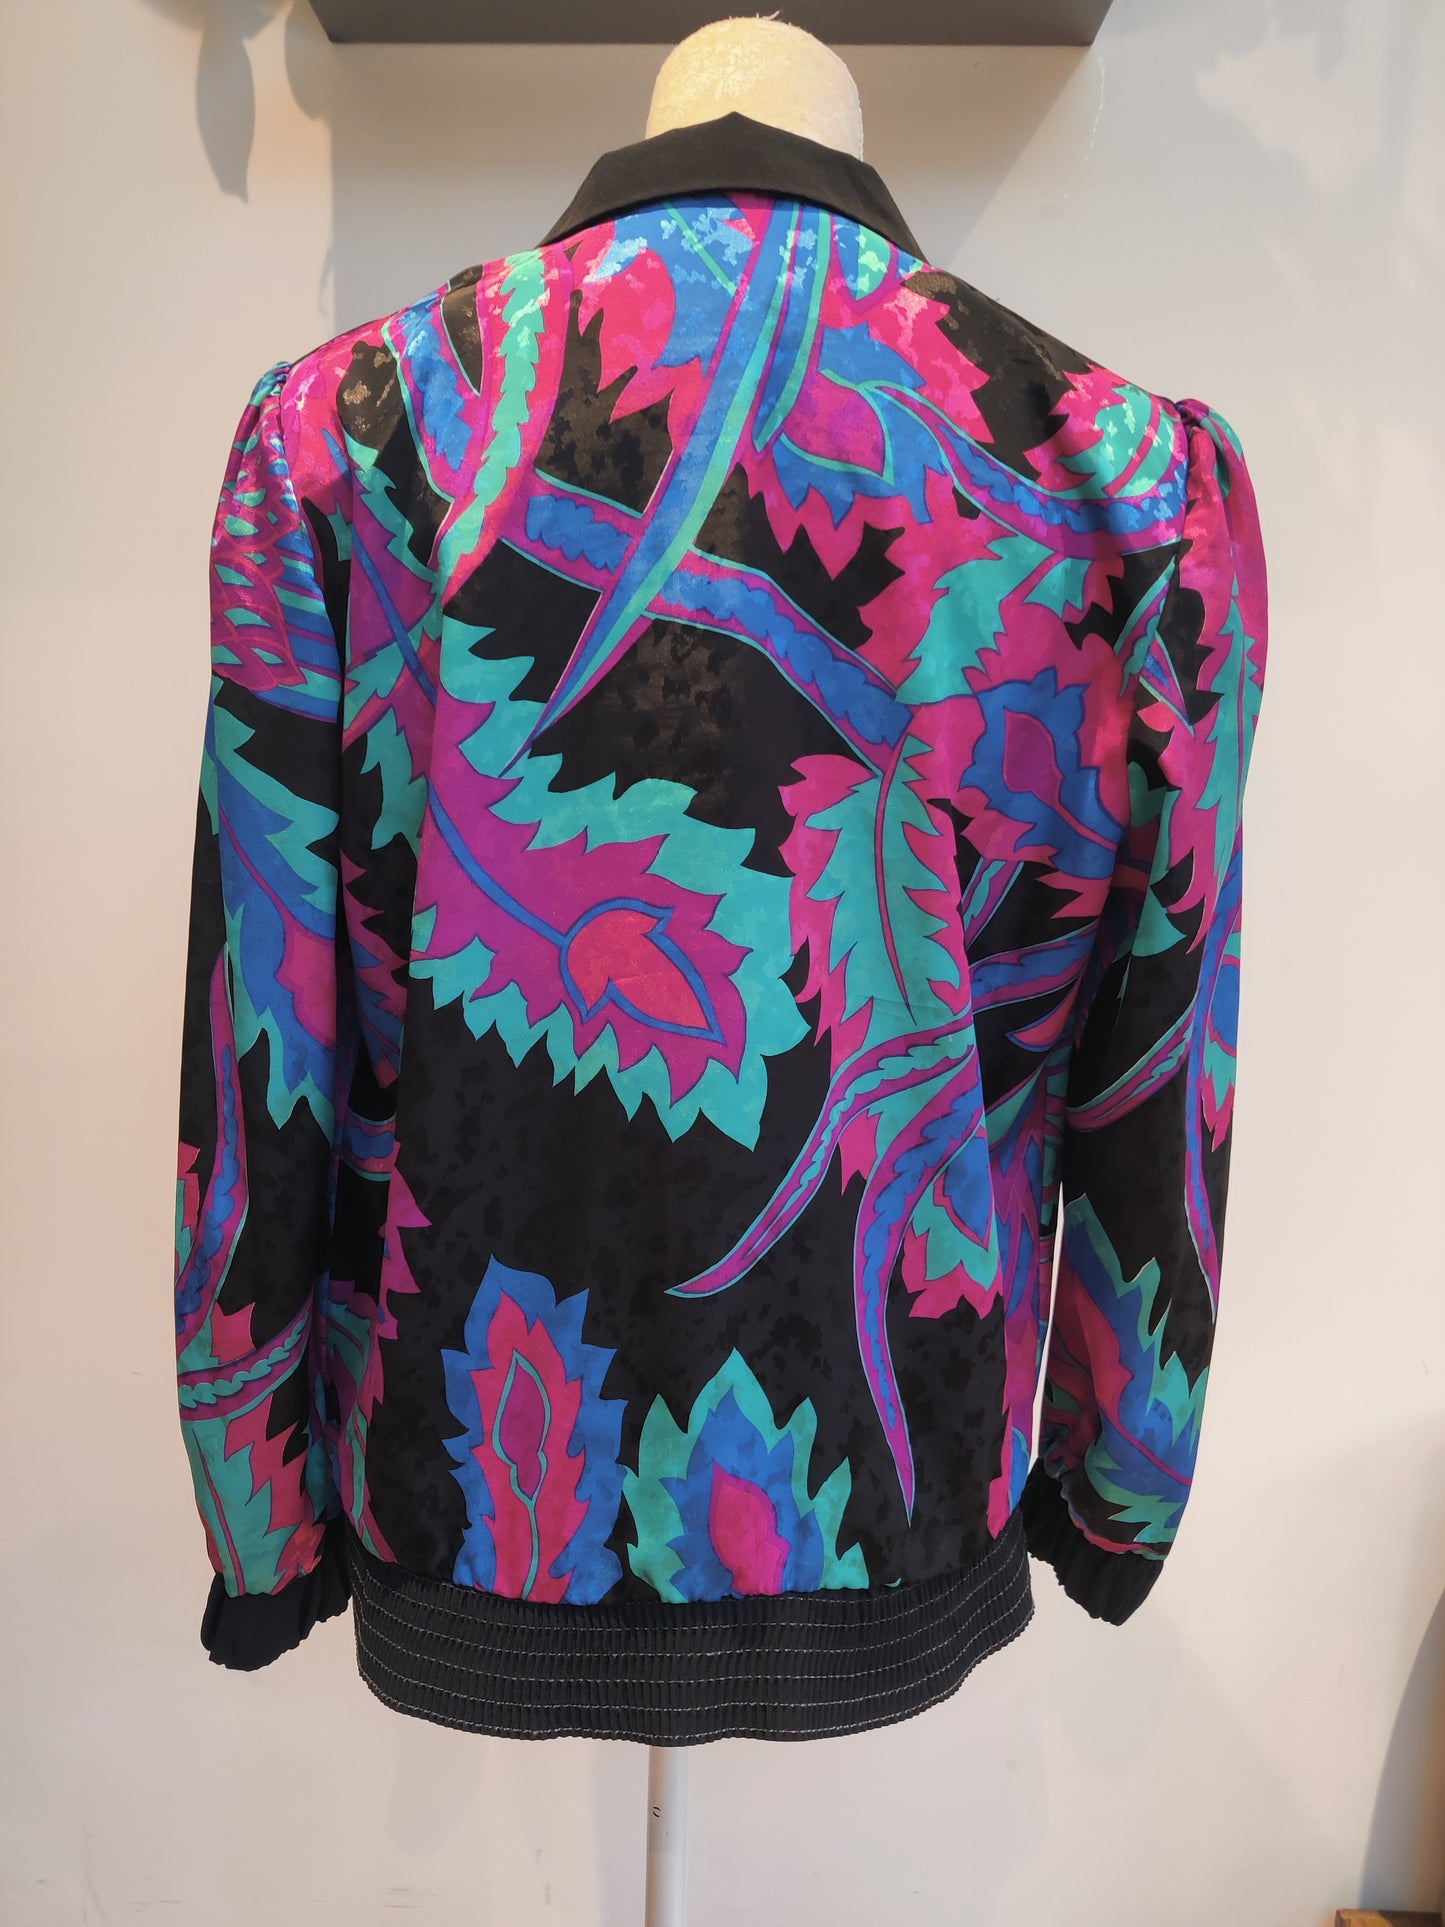 80s top size 12-14